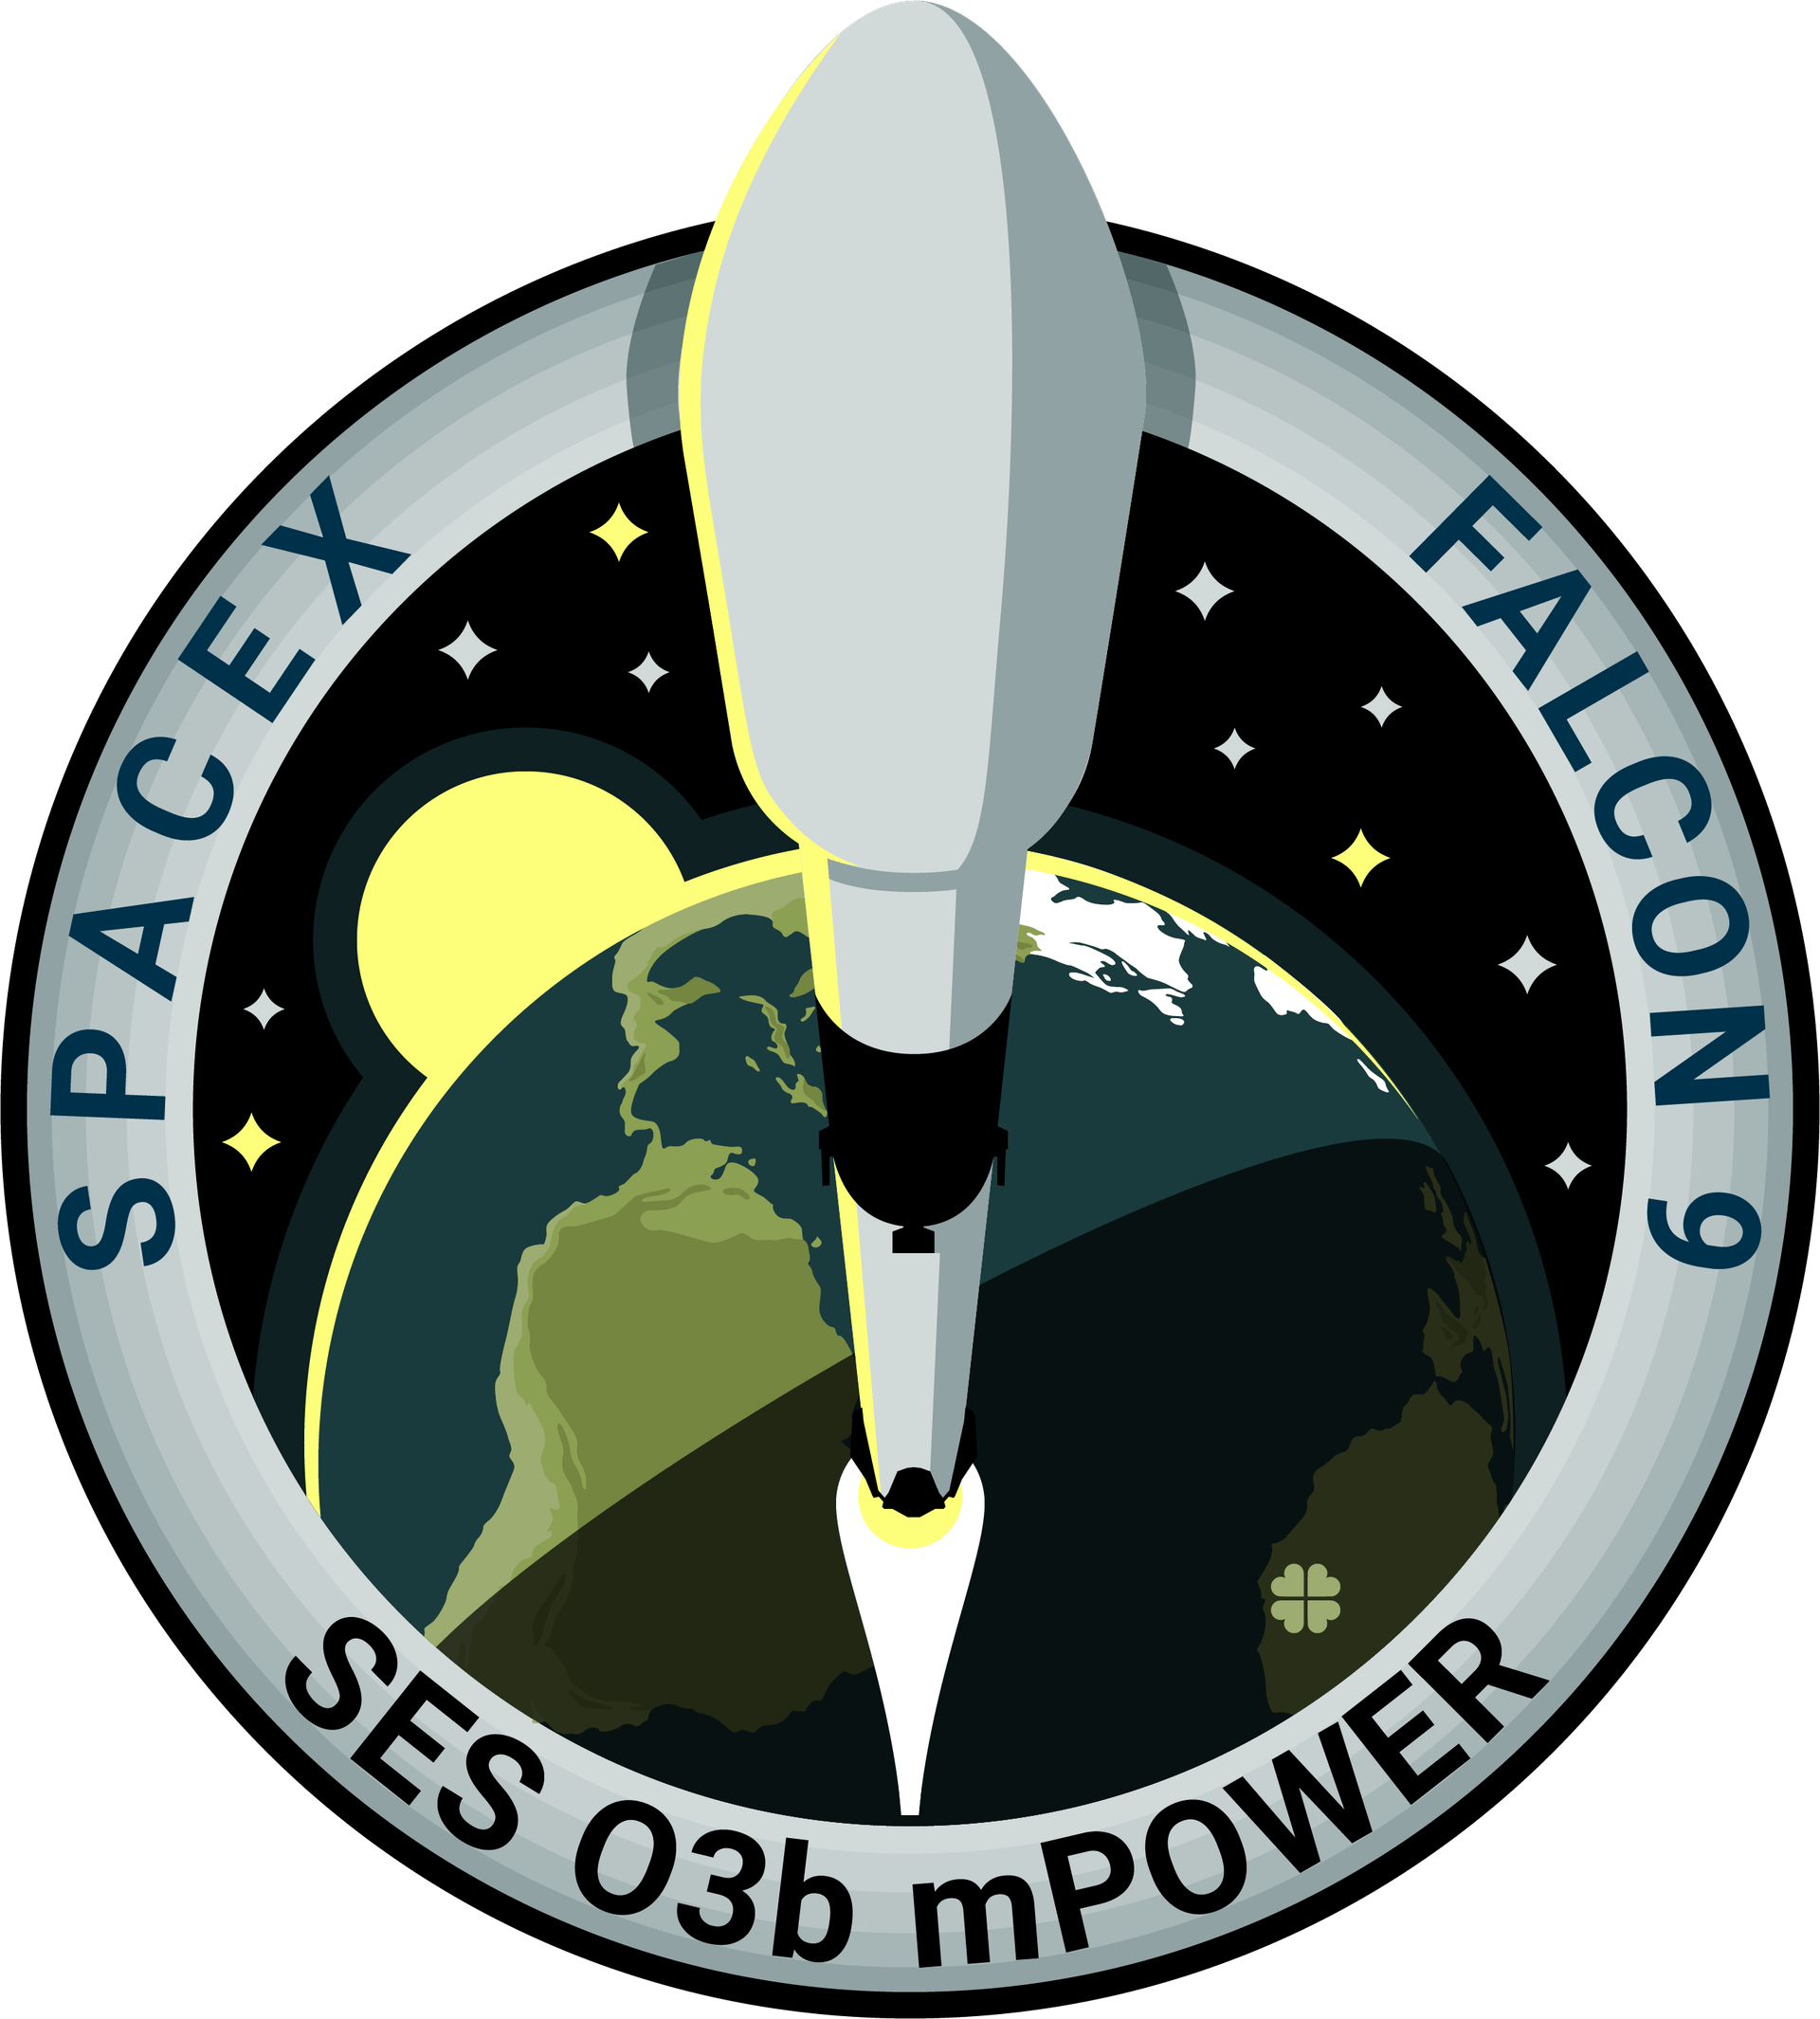 Mission patch for O3b mPower 1 & 2